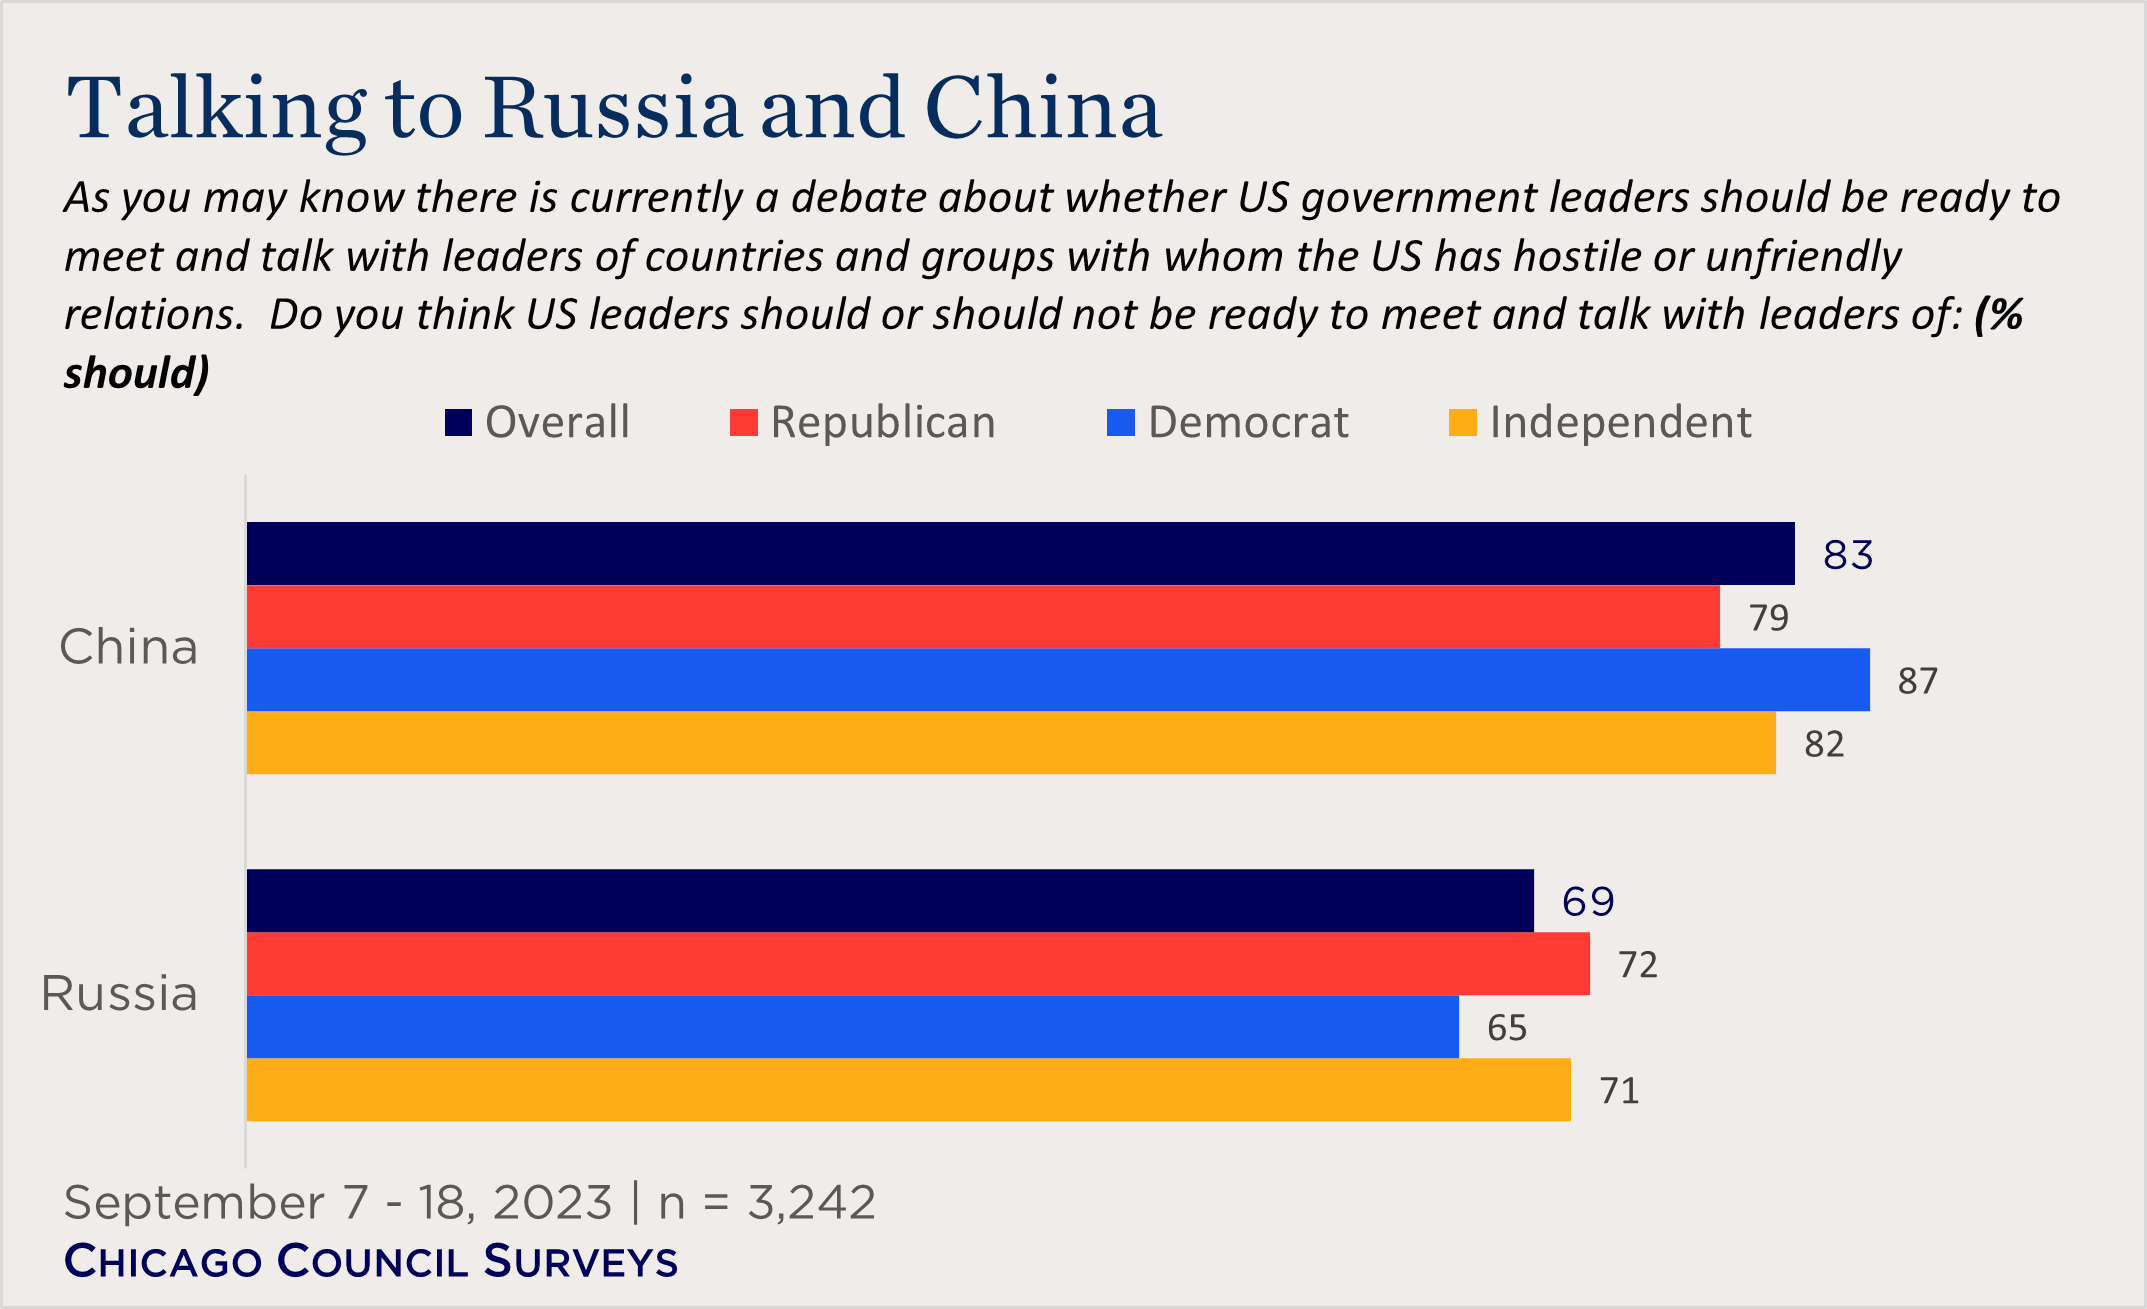 "bar chart showing partisan views of talking to Russia and China"